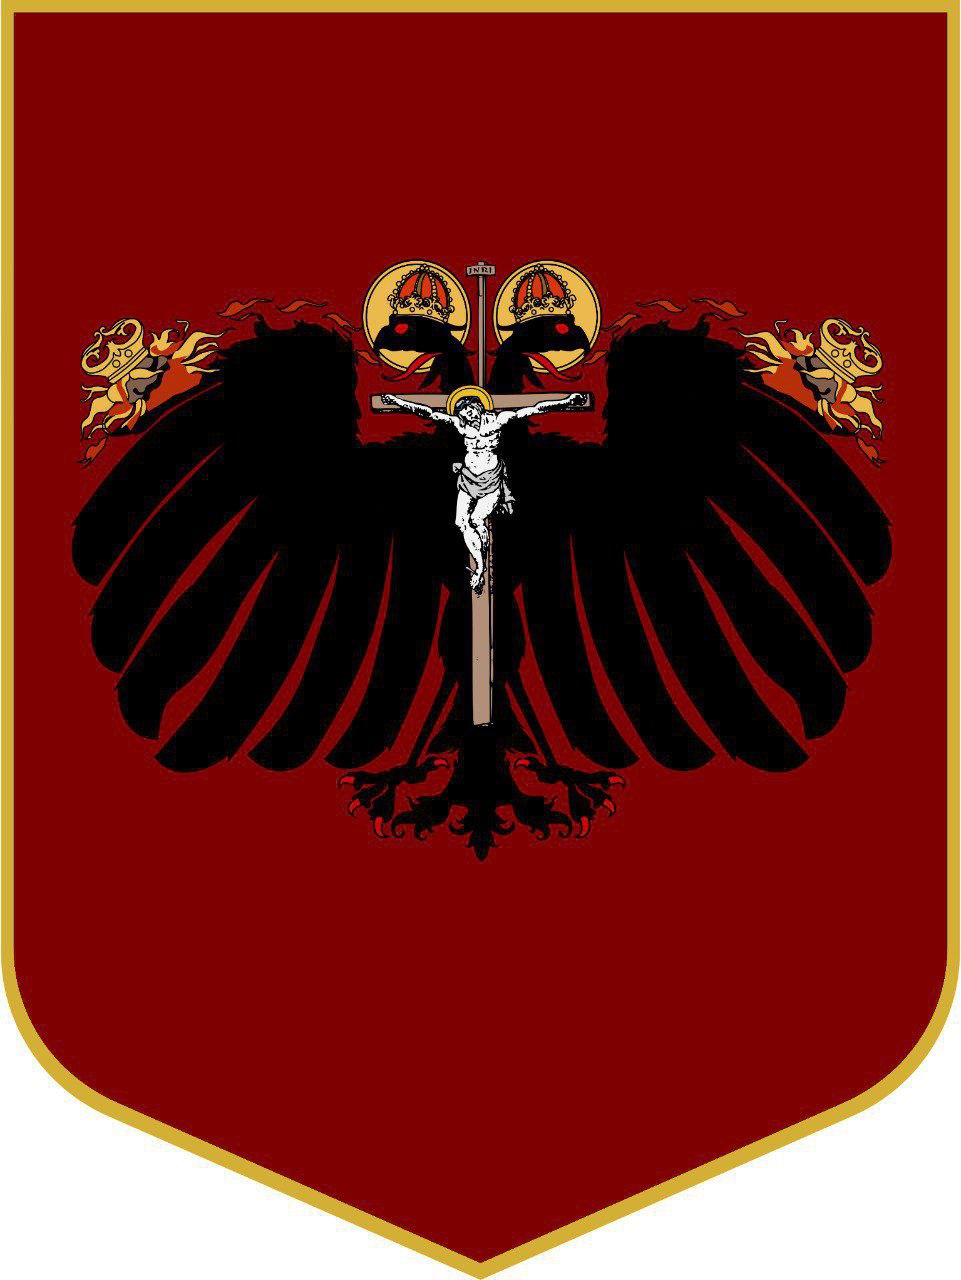 Shield Germany 1 by Claveworks on DeviantArt